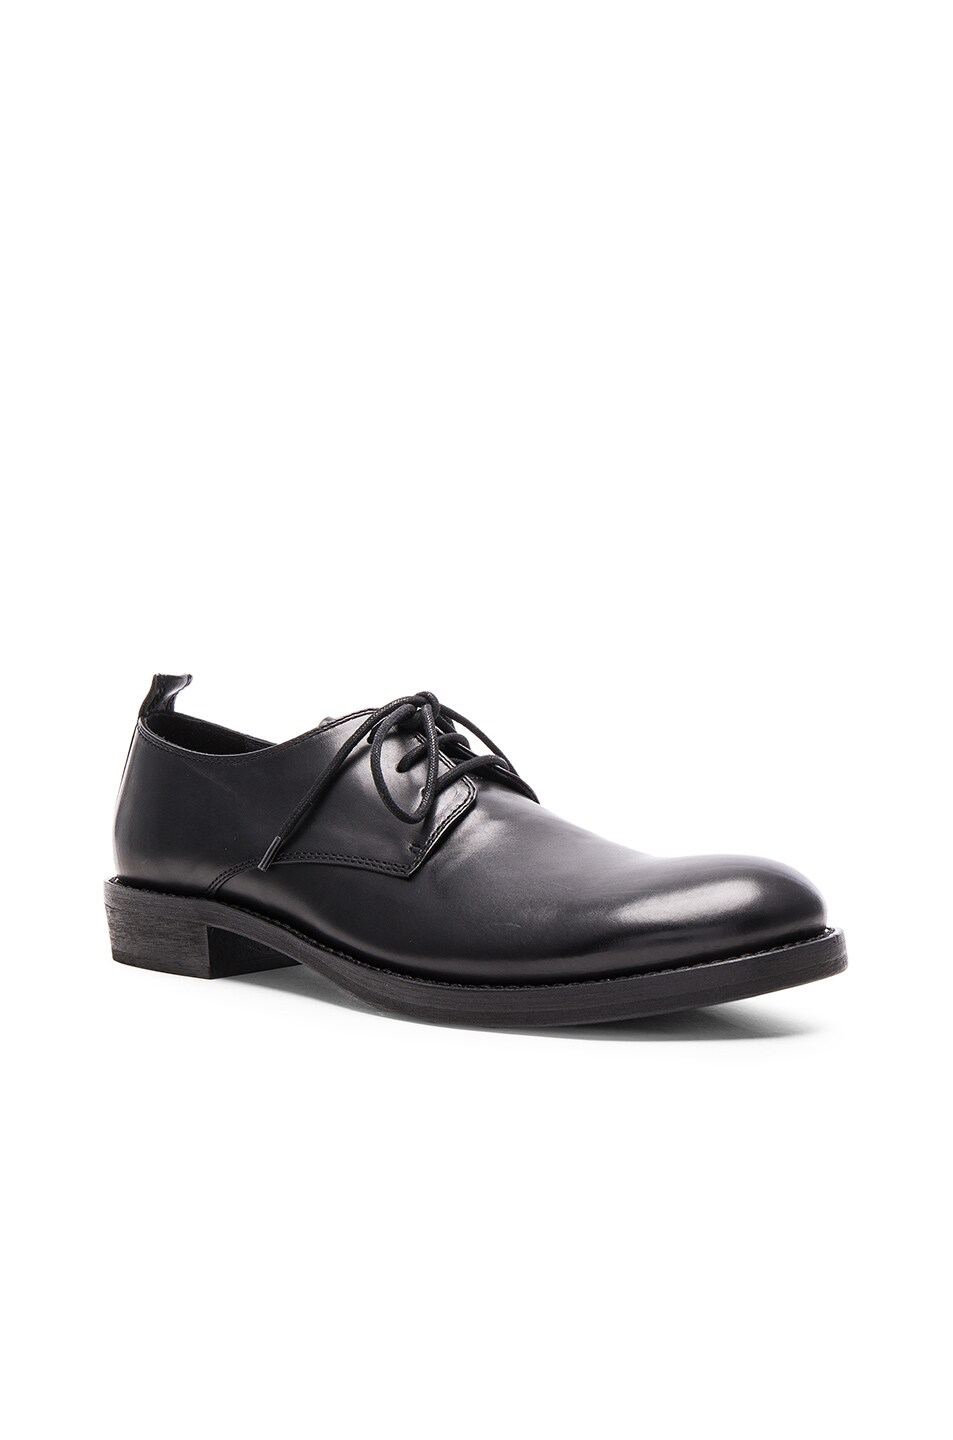 Image 1 of Ann Demeulemeester Leather Dress Shoes in Black